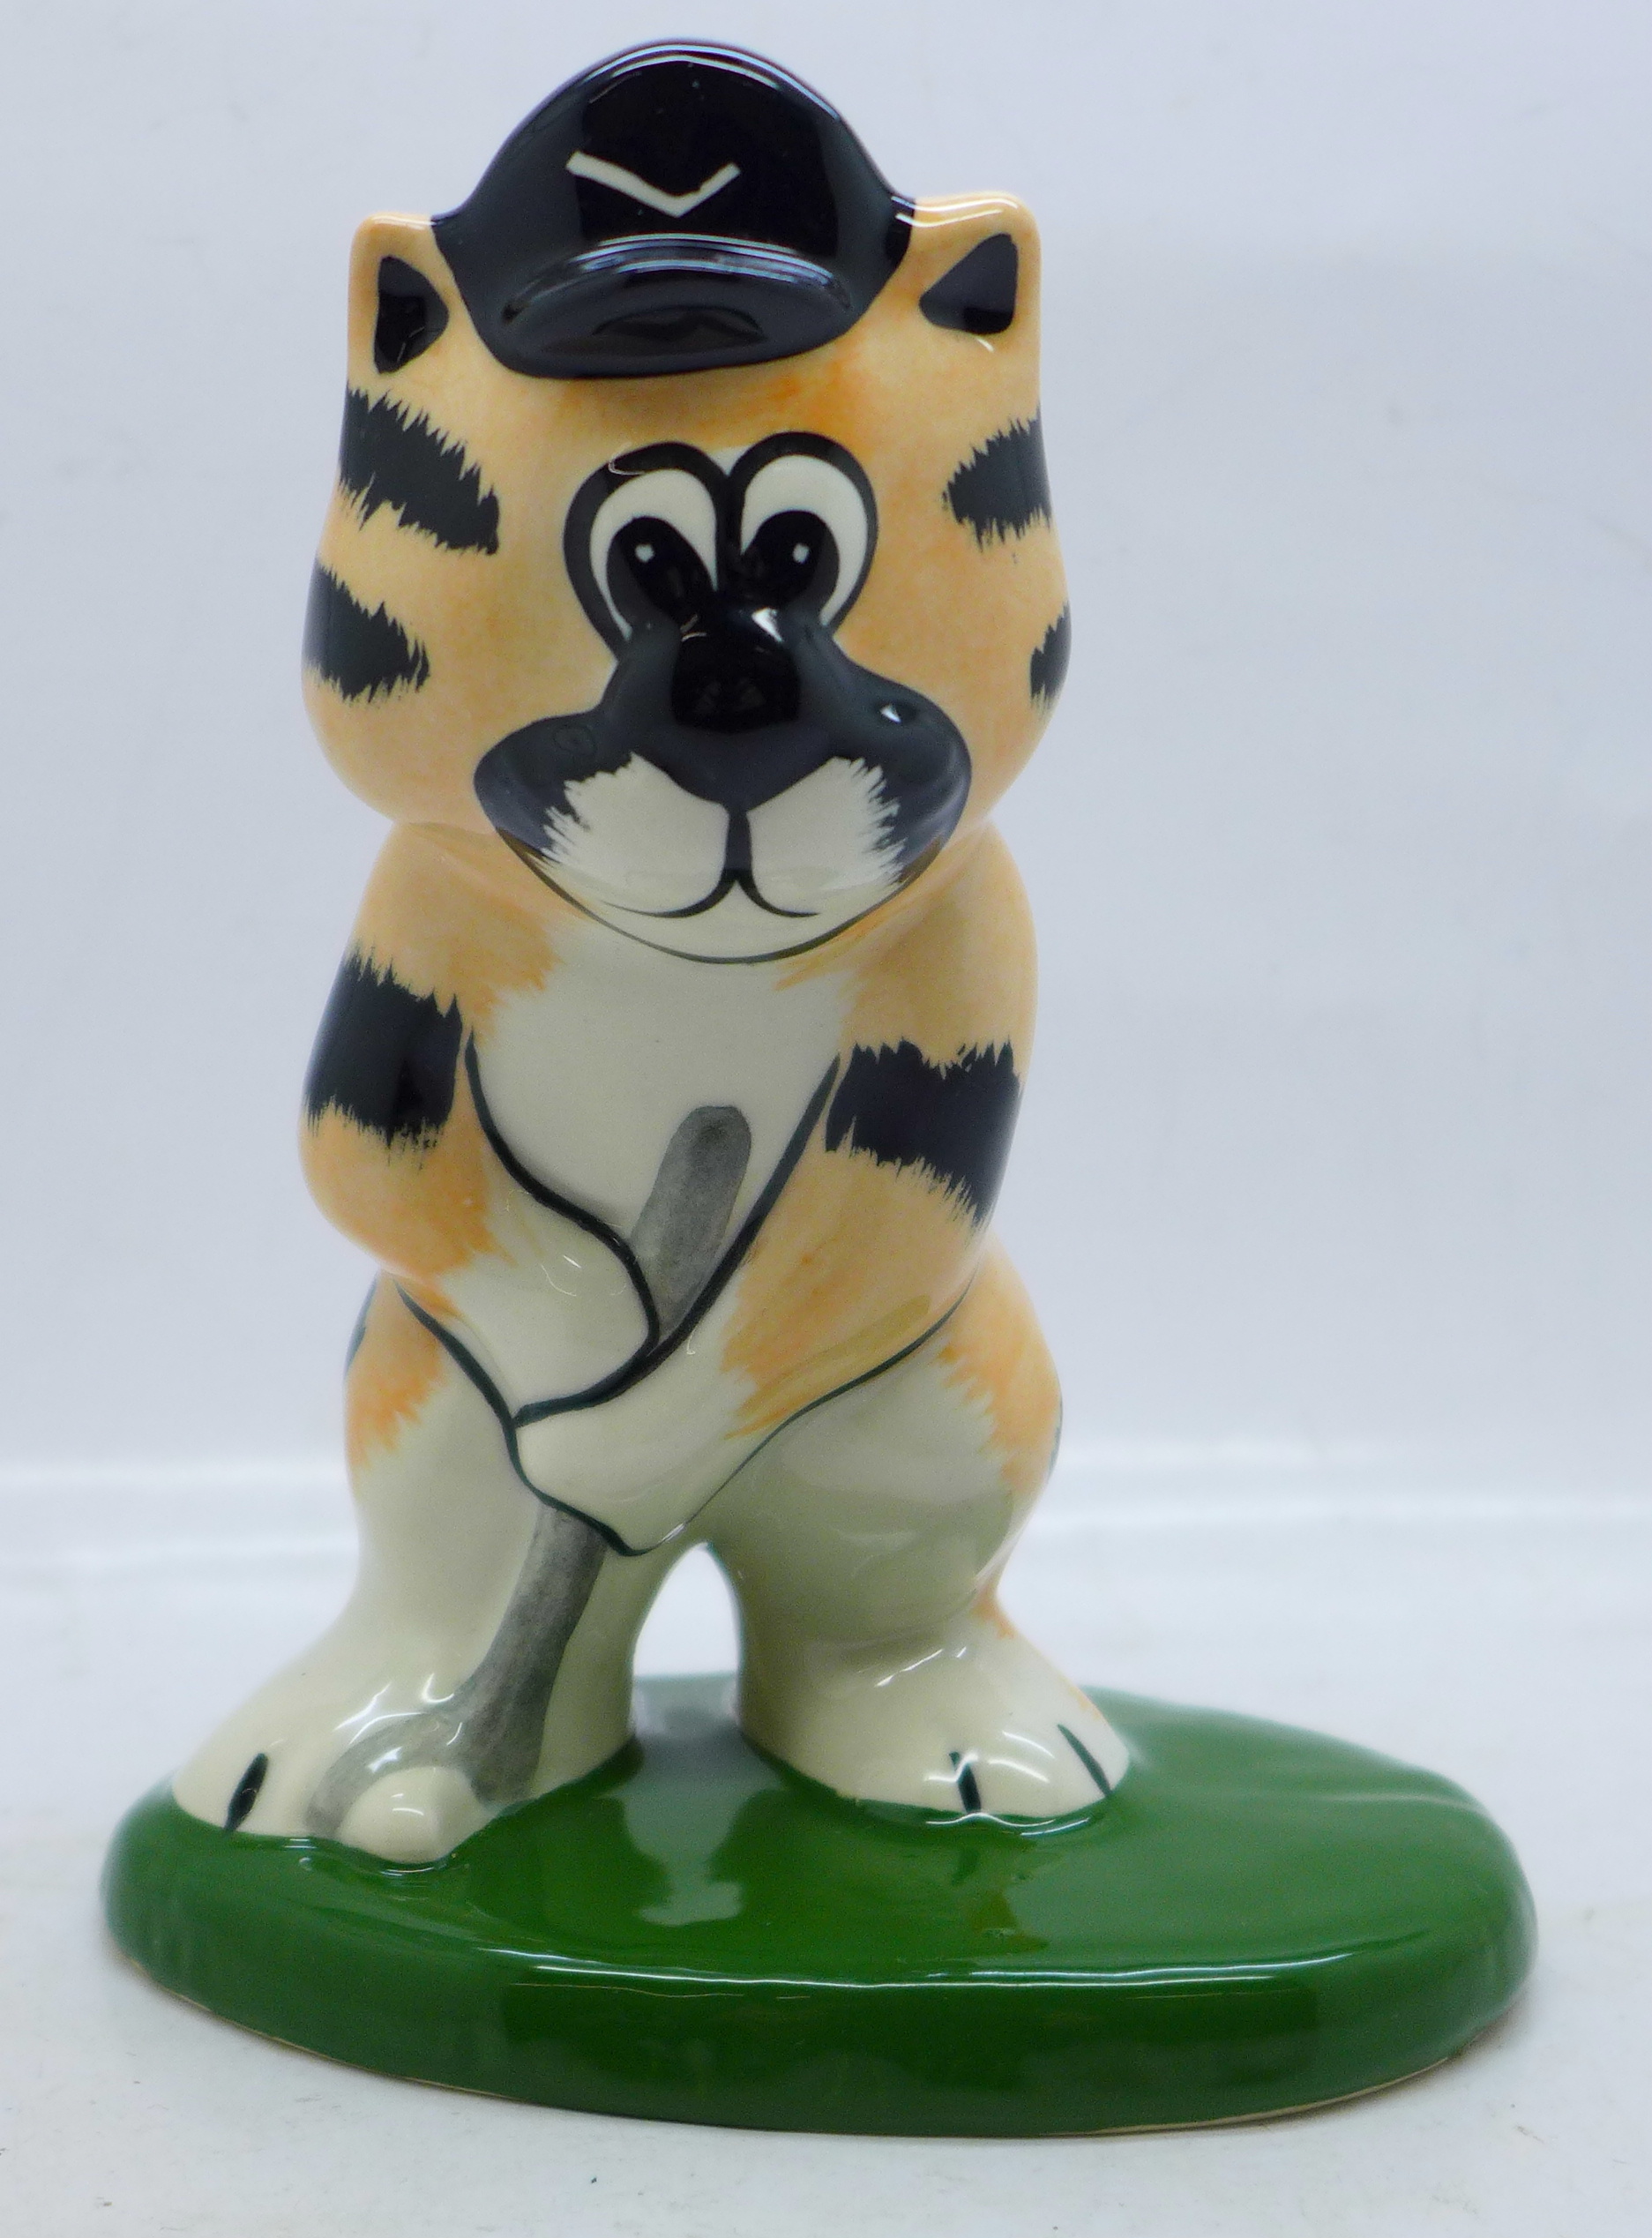 Lorna Bailey Pottery, 'Fore the Golfing Cat', signed on base, 15cm